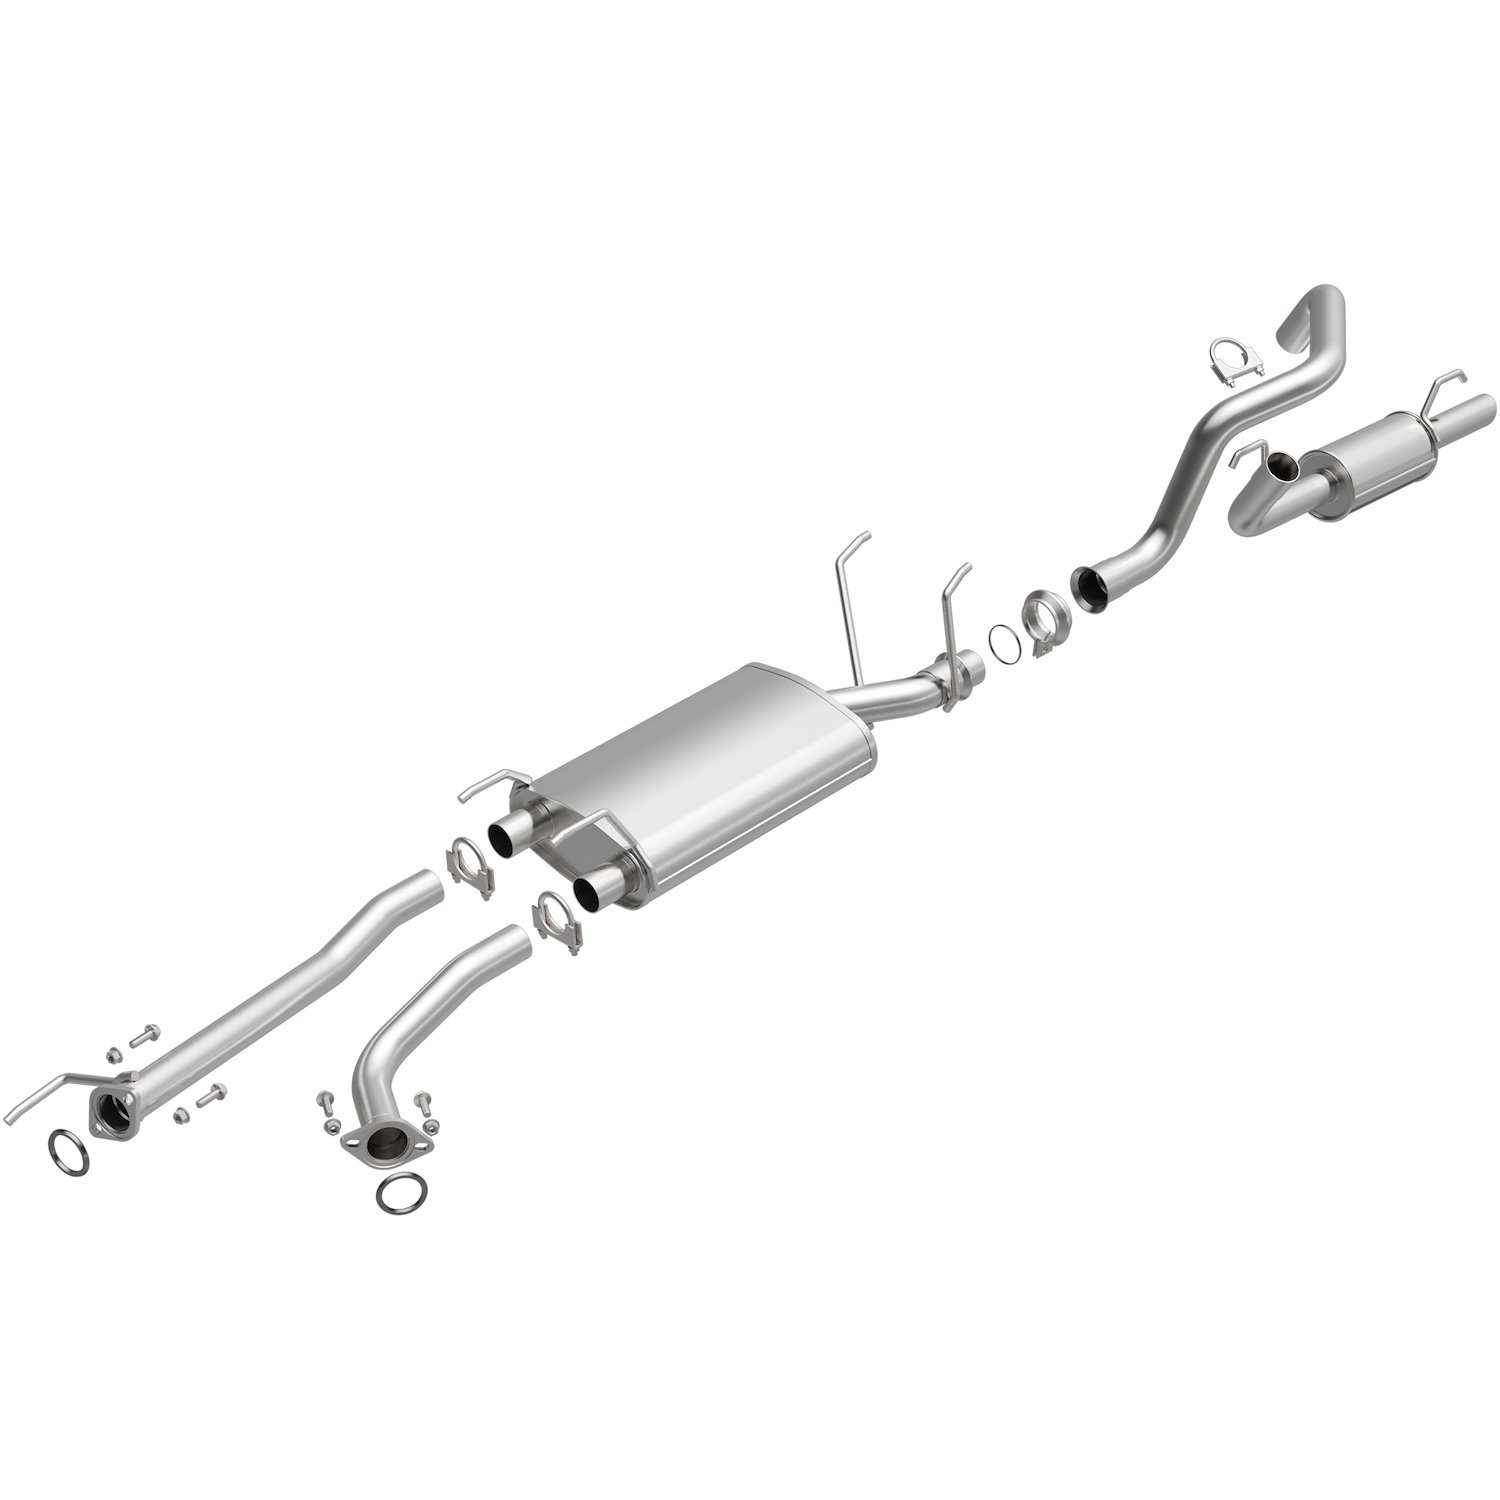 Direct-Fit Exhaust Kit, 2001-2007 Toyota Sequoia 4.7L